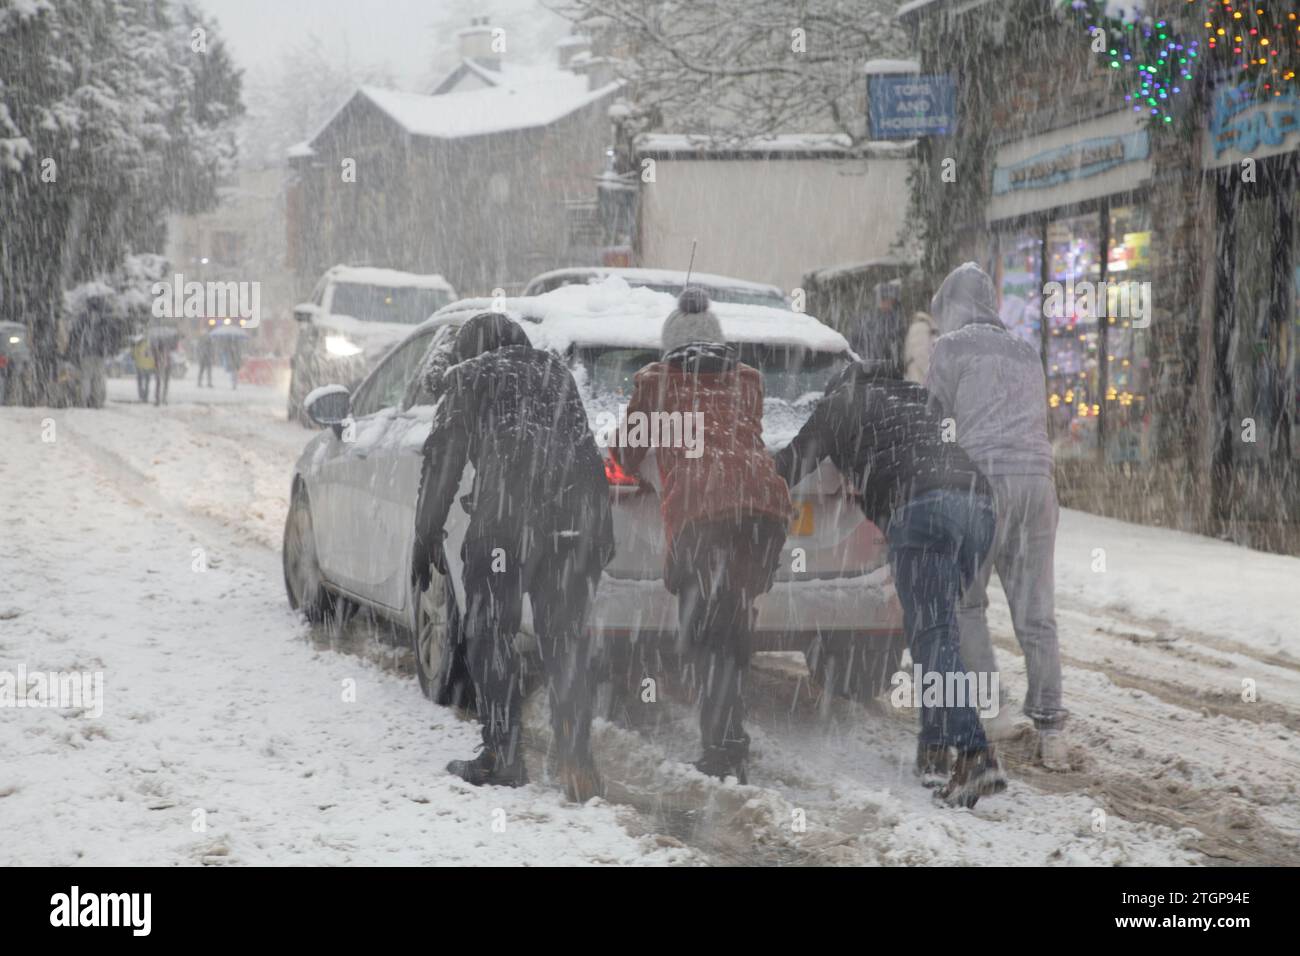 Members of the public push a stranded car up an incline during a snowstorm in Windermere, Lake District Stock Photo